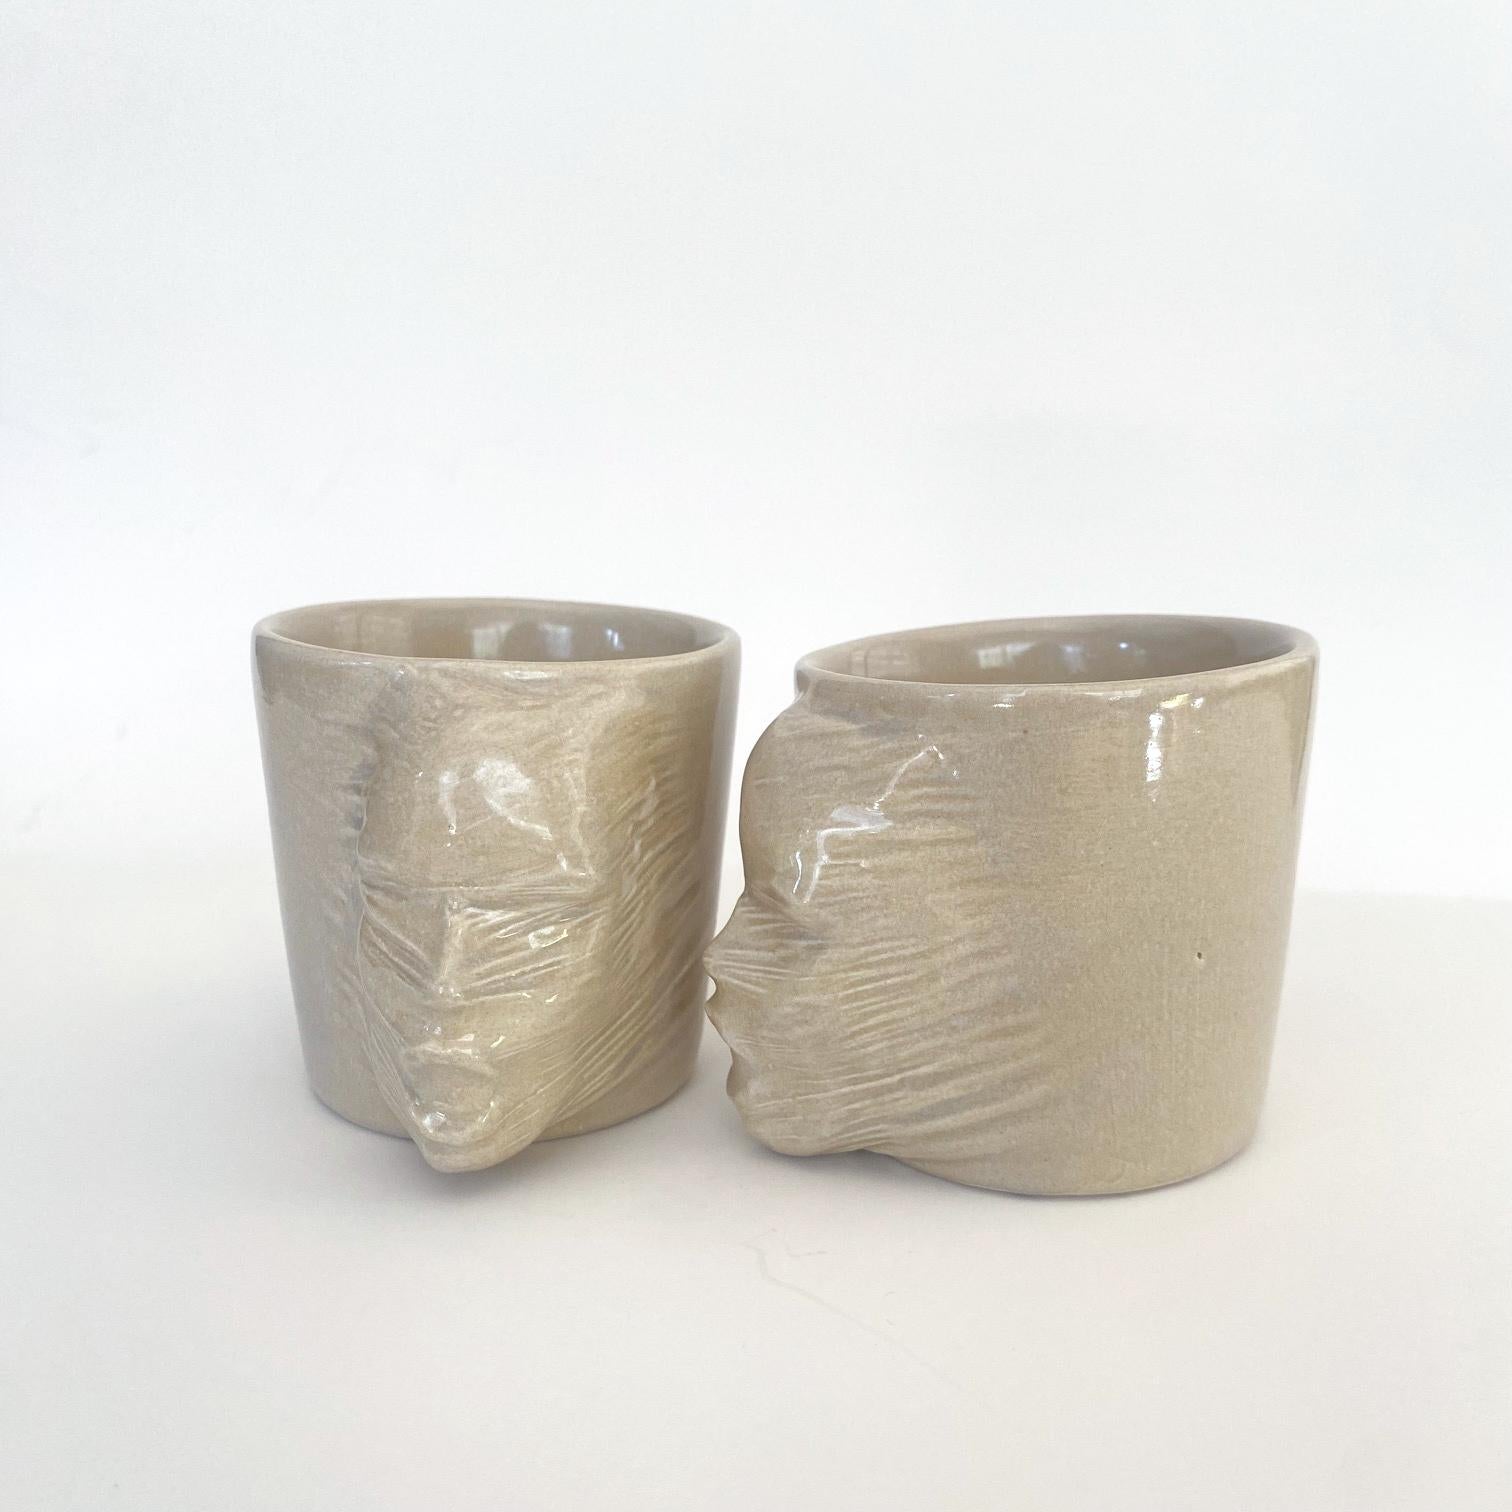 Turkish Sculptural Ceramic Cups Set of 2 by Hulya Sozer, Face Silhouette, Sand Beige For Sale